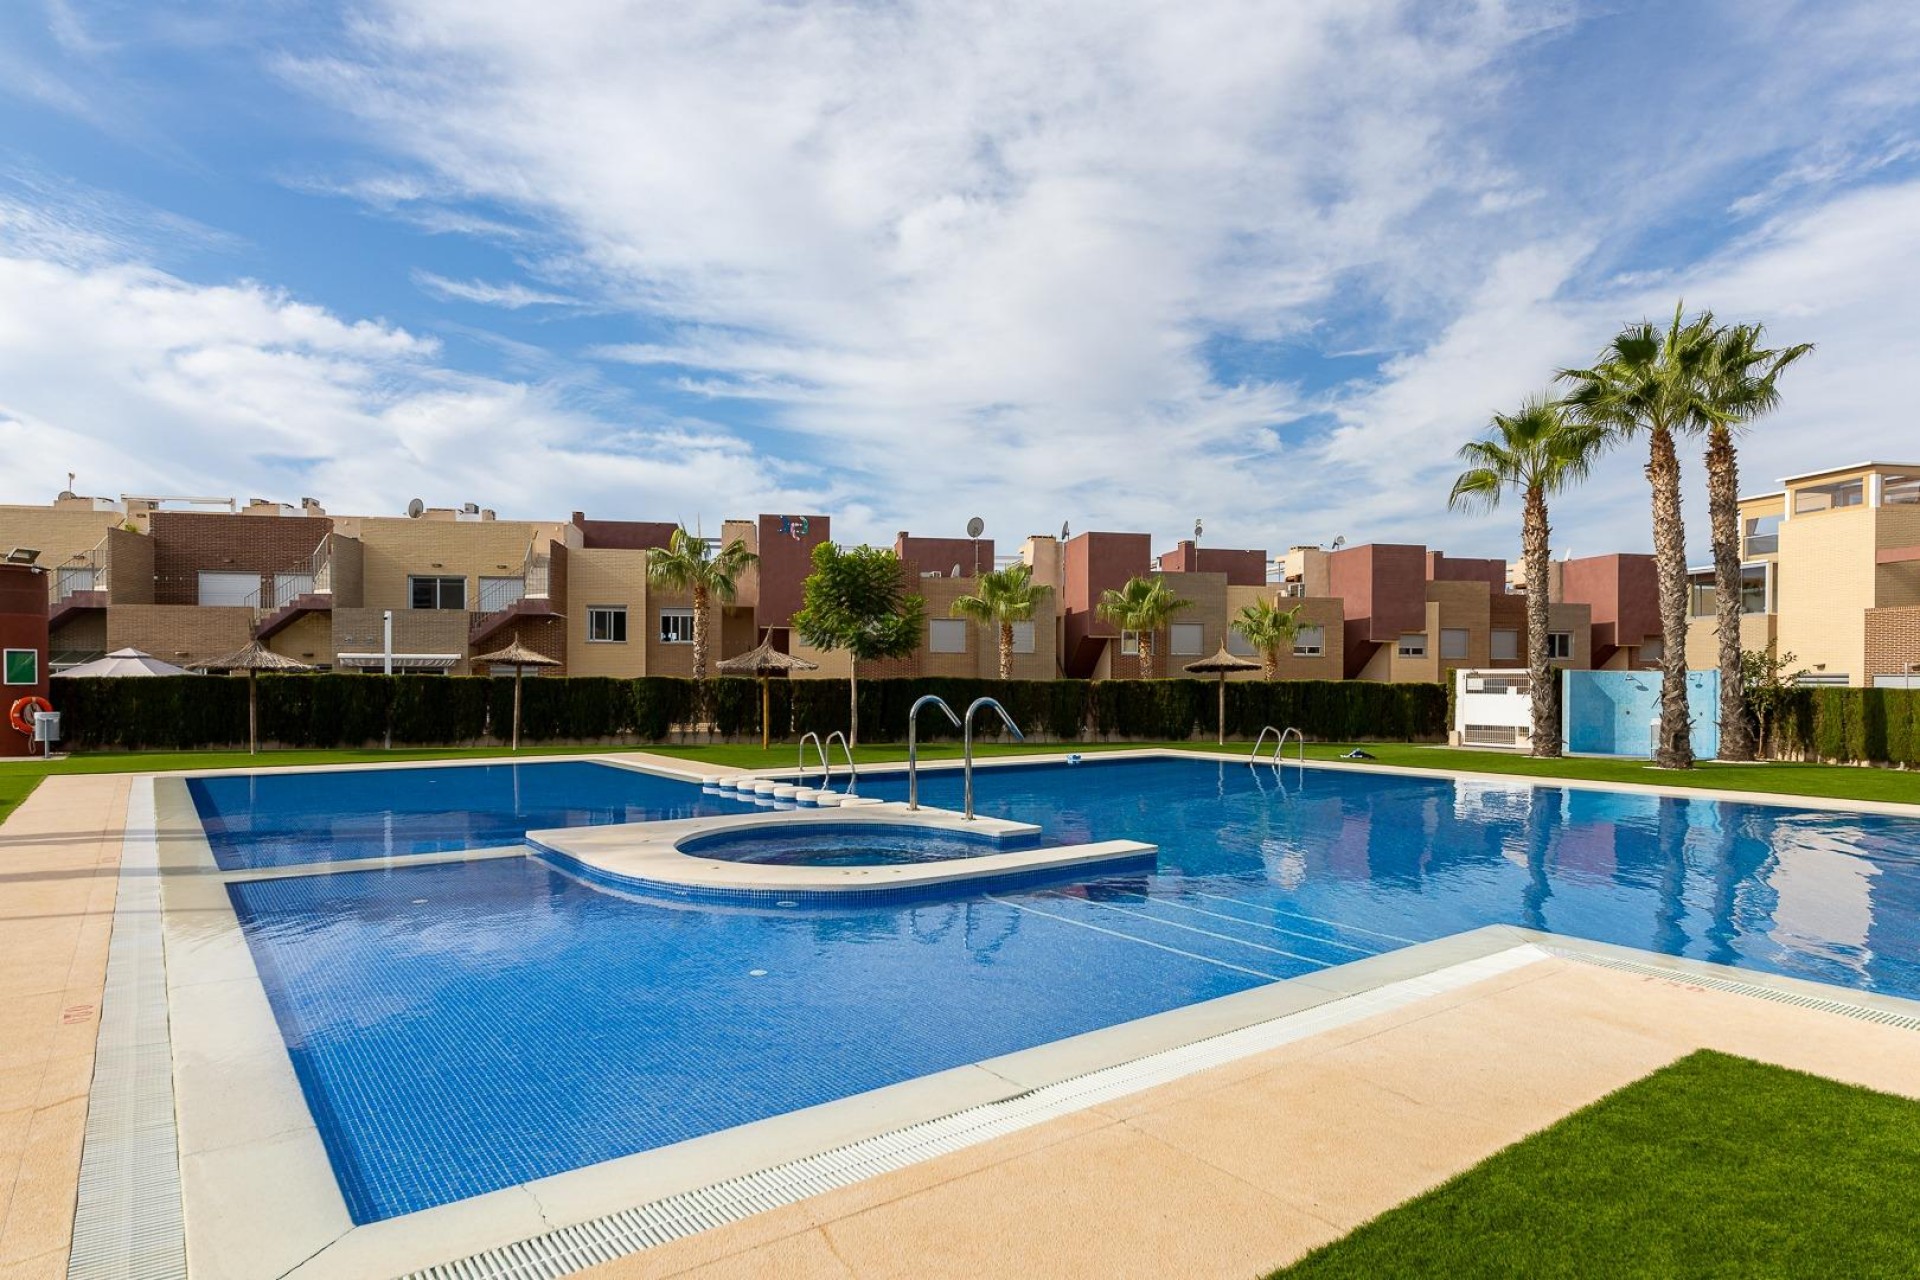 Resale - Bungalow -
Torrevieja - Sector 25